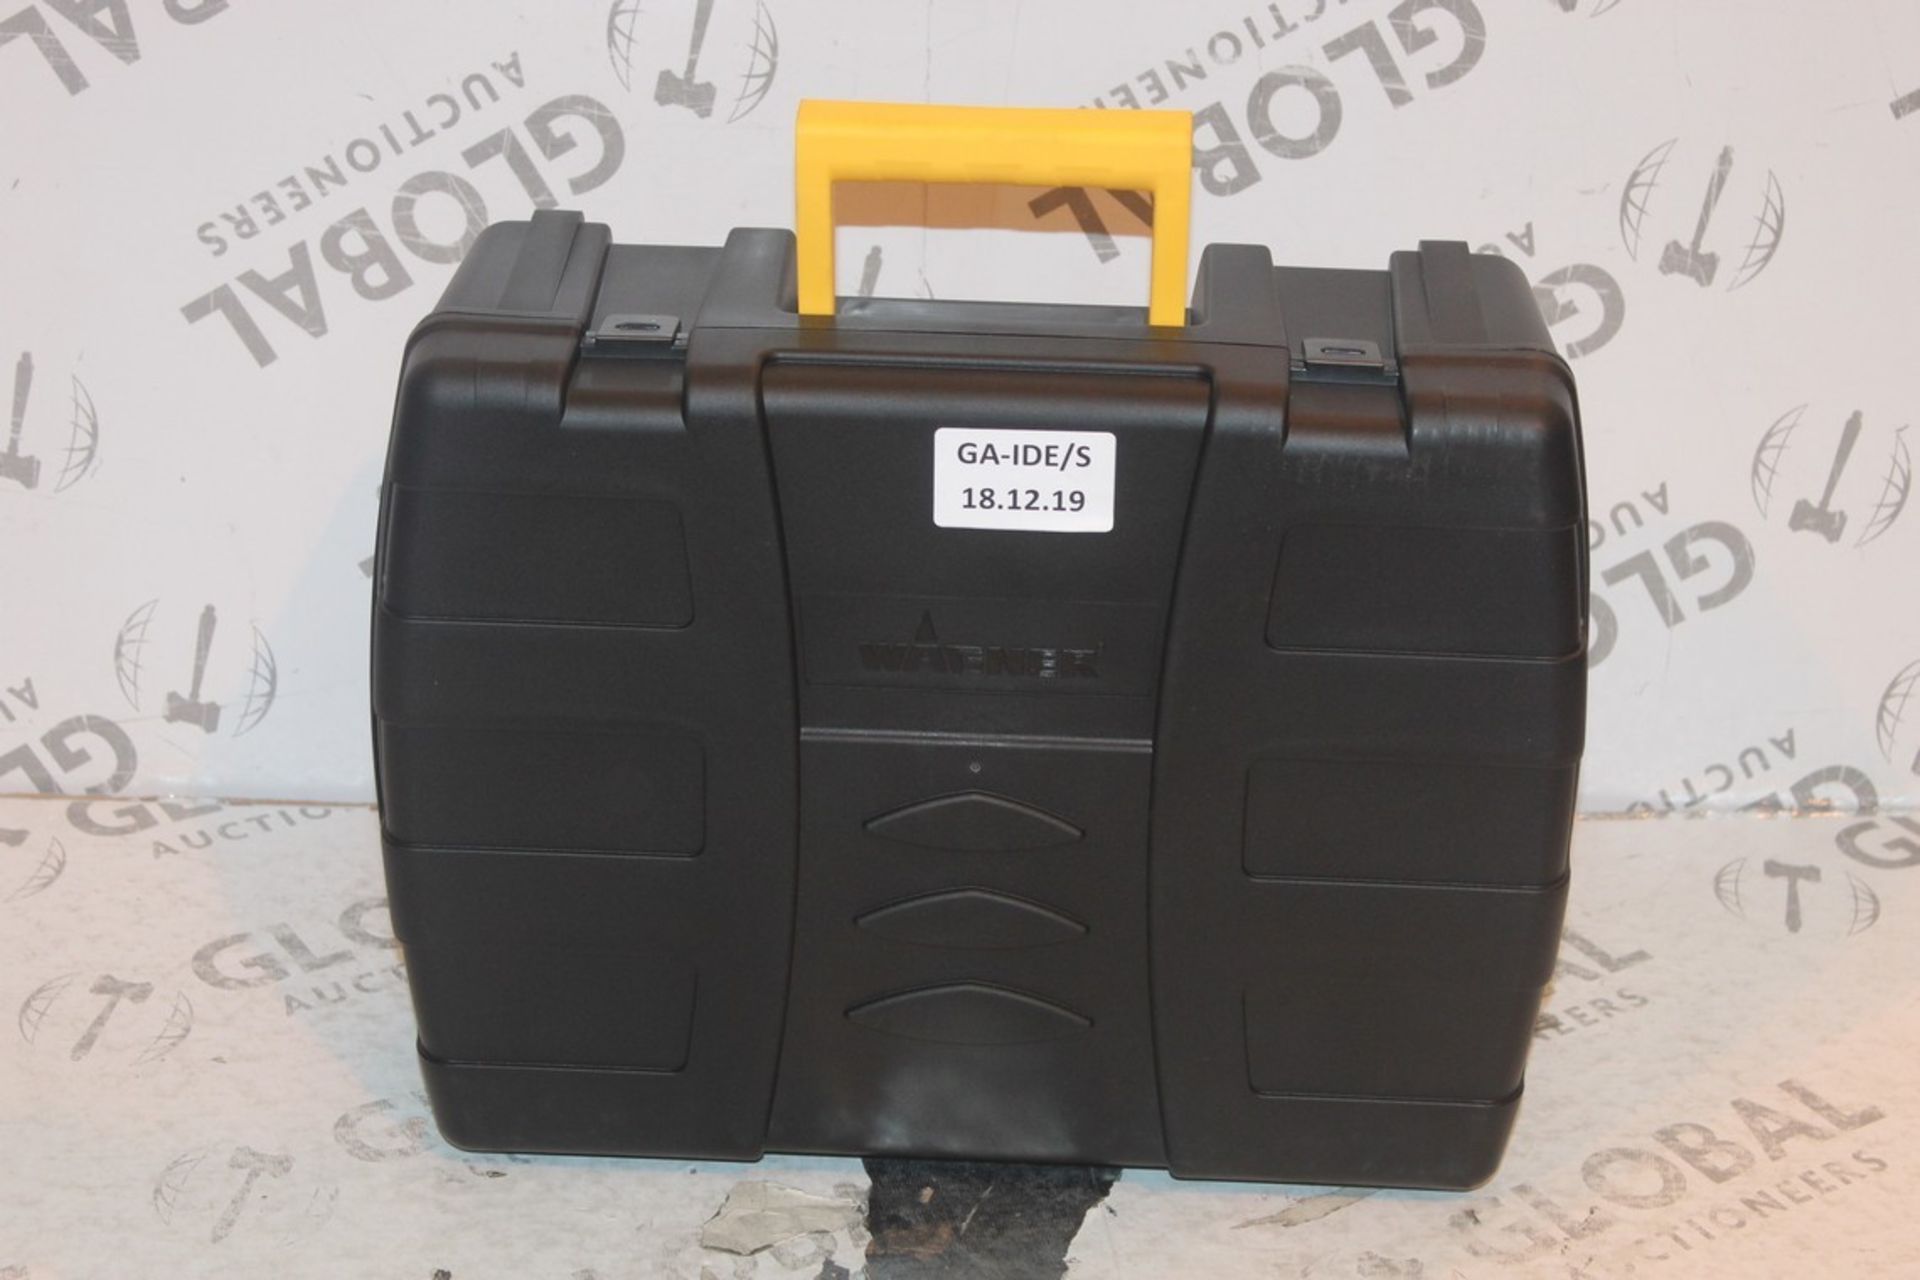 Boxed Wagna WP Flexio Tool Carry Case RRP £40 (Appraisals Available Upon Request)